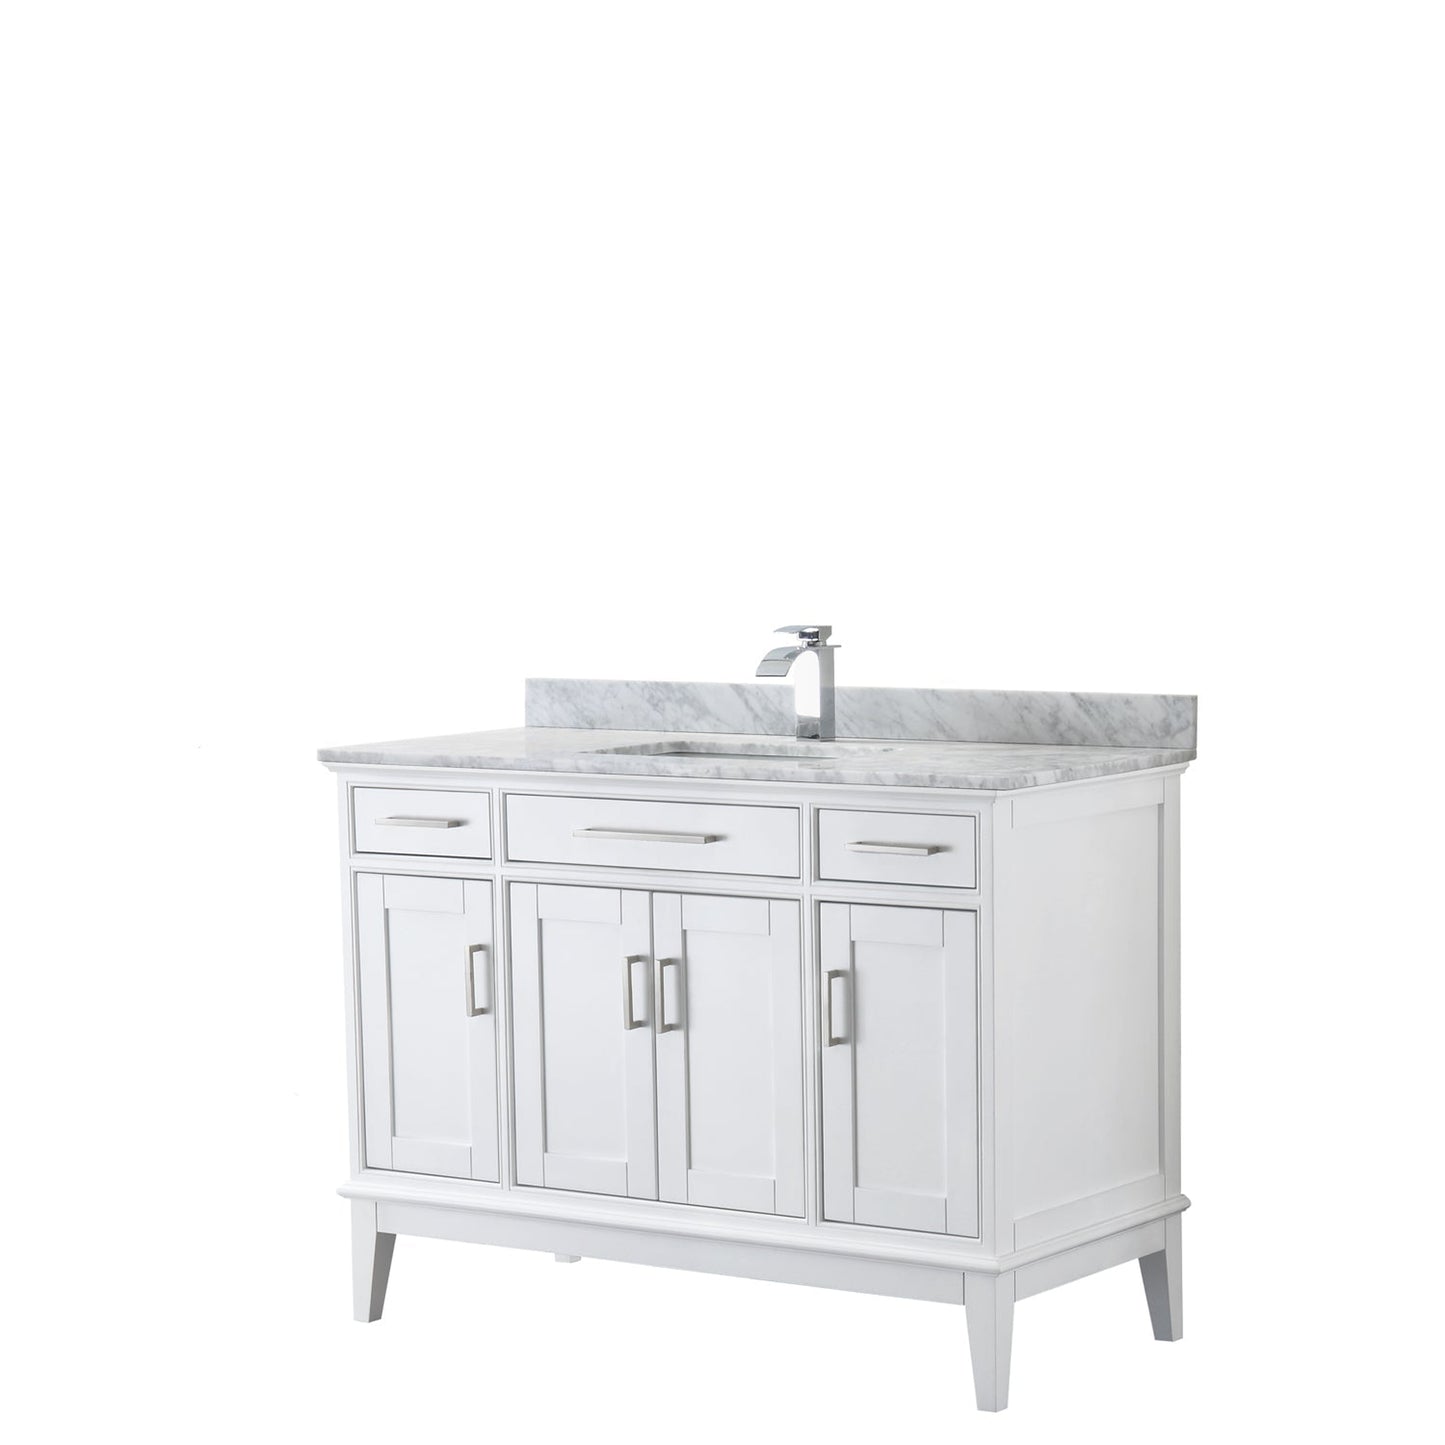 Wyndham Collection Margate 48" Single Bathroom White Vanity With White Carrara Marble Countertop And Undermount Square Sink